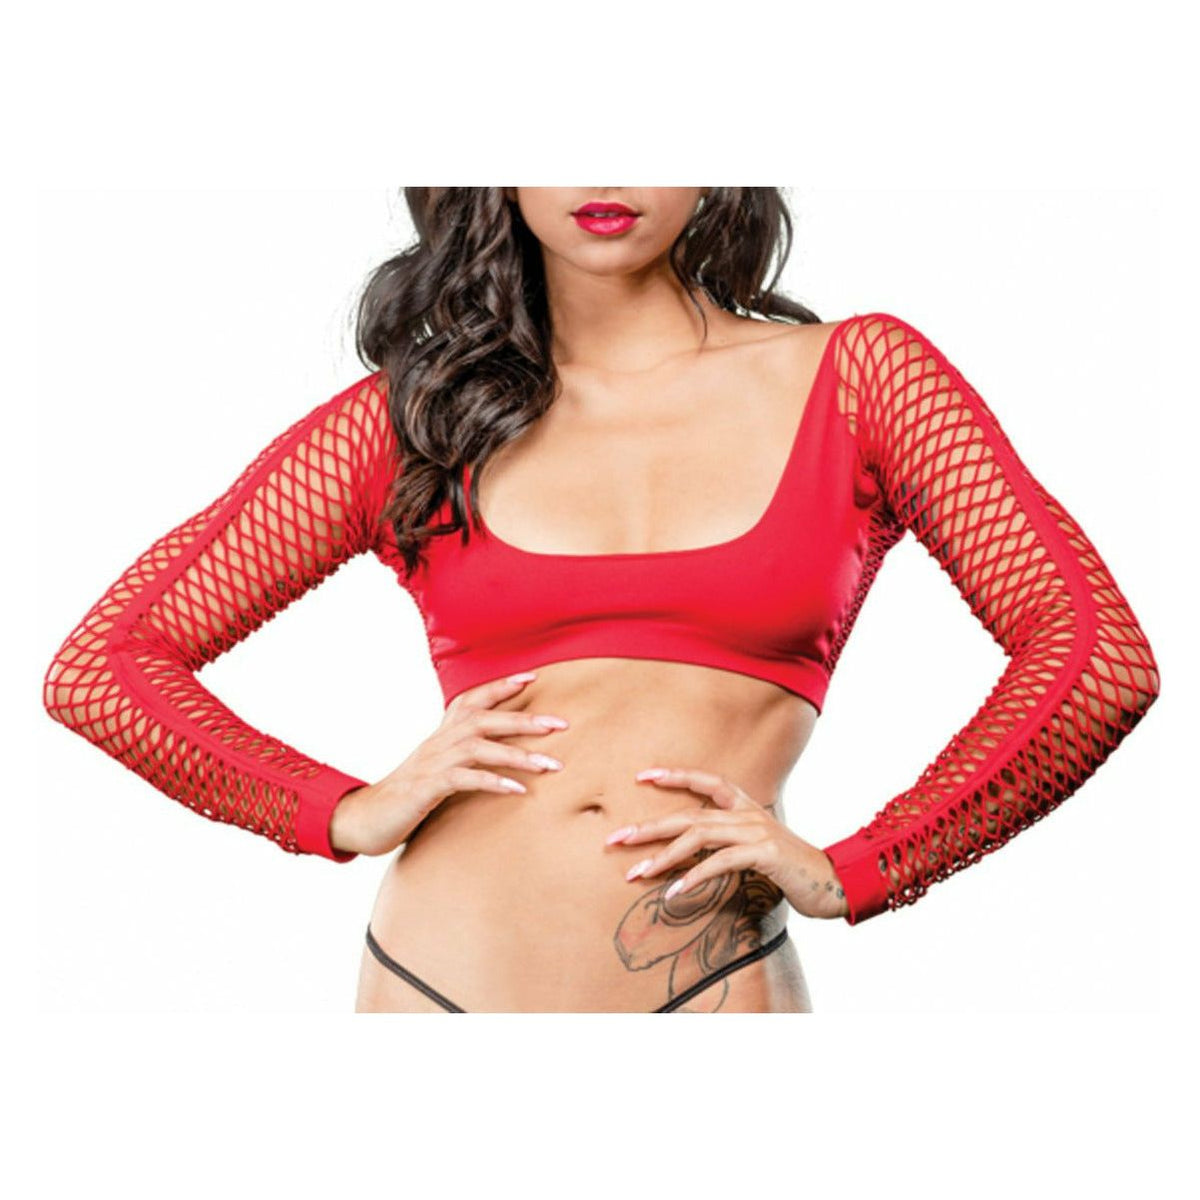 Beverly Hills Naughty Girl -  Crotchless Short with Mesh Bottom Leggings - Red - One Size